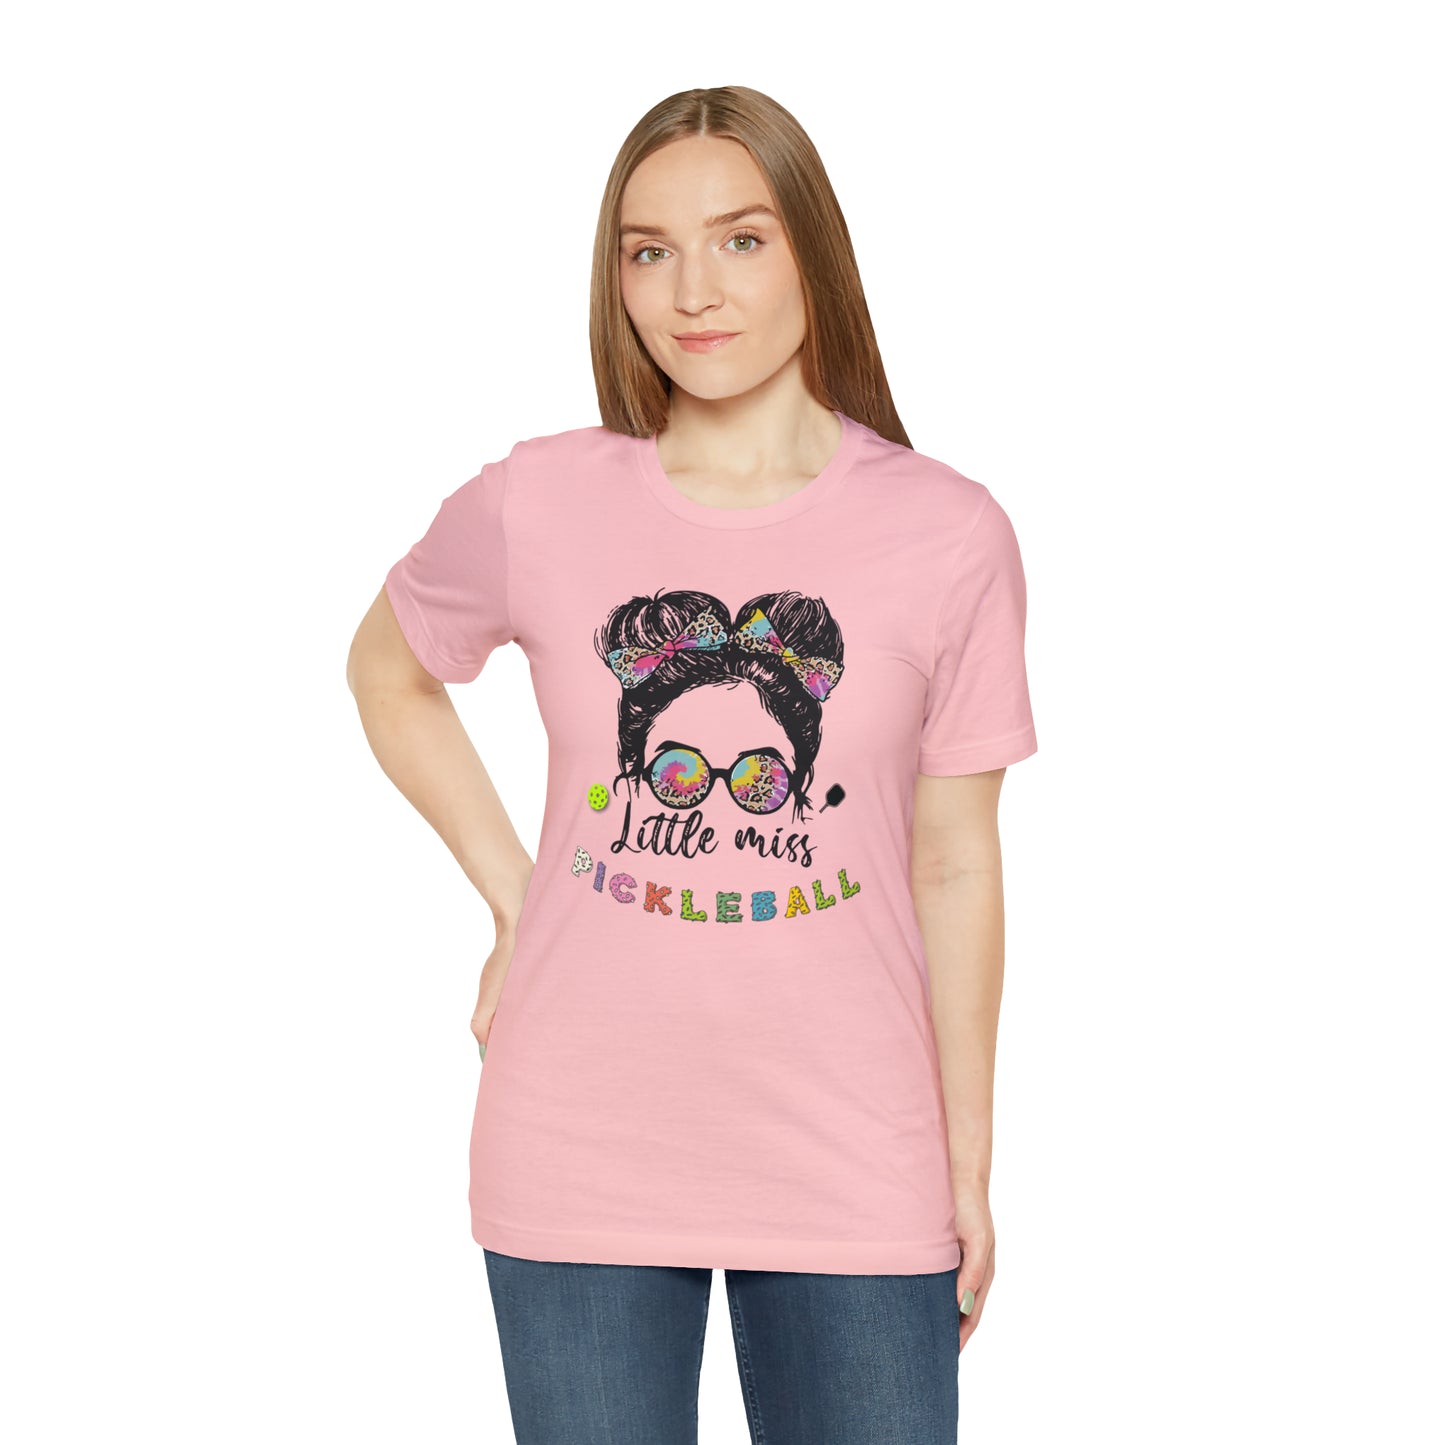 Little Miss Pickleball - Unisex Jersey Tee for the Pickleball Enthusiast